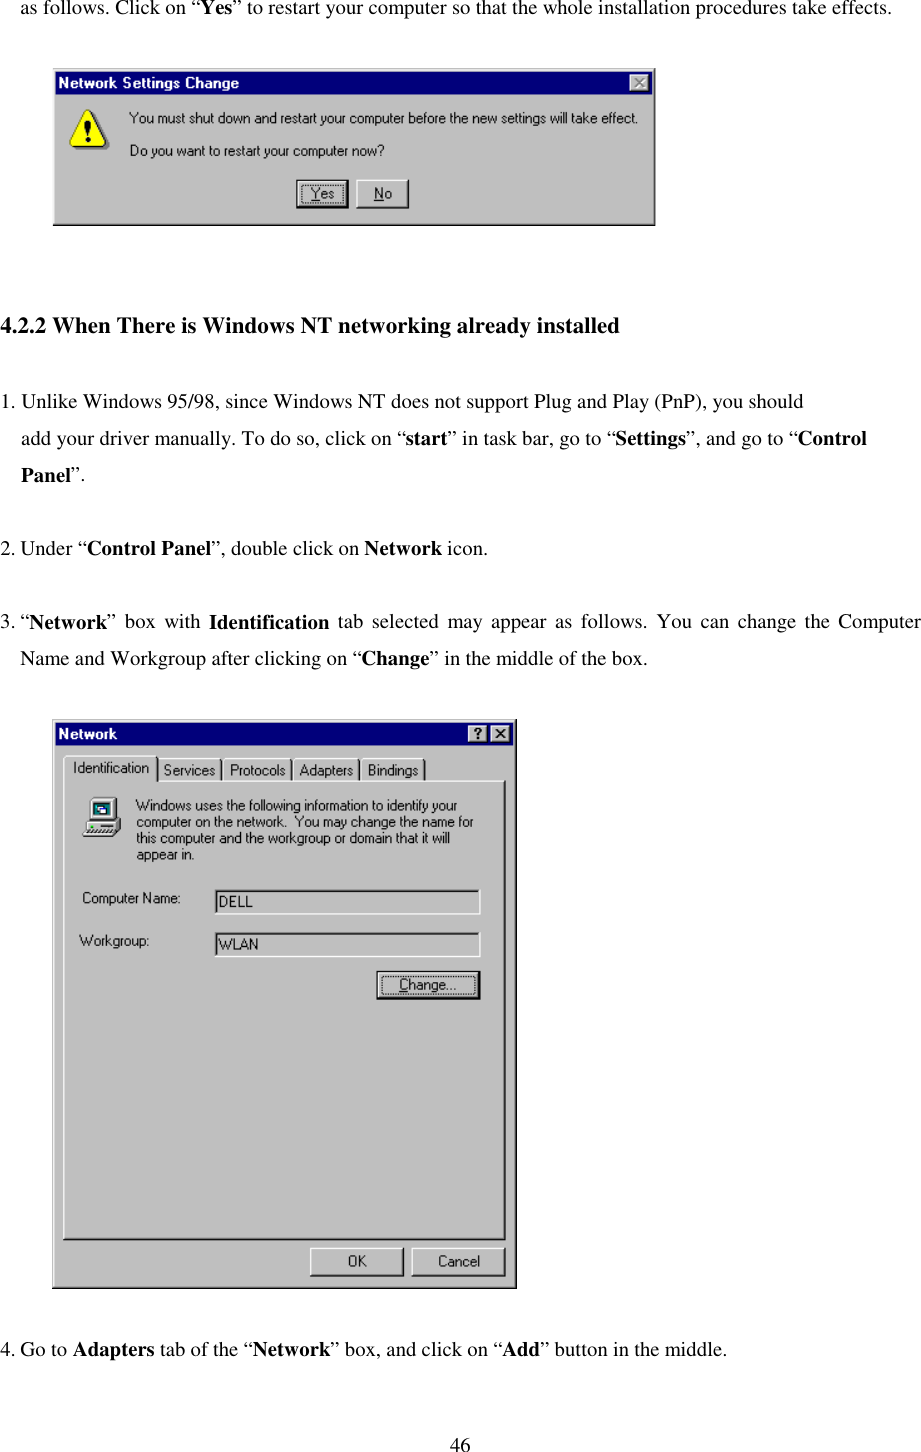   46 as follows. Click on “Yes” to restart your computer so that the whole installation procedures take effects.                    4.2.2 When There is Windows NT networking already installed  1. Unlike Windows 95/98, since Windows NT does not support Plug and Play (PnP), you should     add your driver manually. To do so, click on “start” in task bar, go to “Settings”, and go to “Control     Panel”.  2. Under “Control Panel”, double click on Network icon.   3. “Network” box with Identification tab selected may appear as follows. You can change the Computer Name and Workgroup after clicking on “Change” in the middle of the box.               4. Go to Adapters tab of the “Network” box, and click on “Add” button in the middle.   